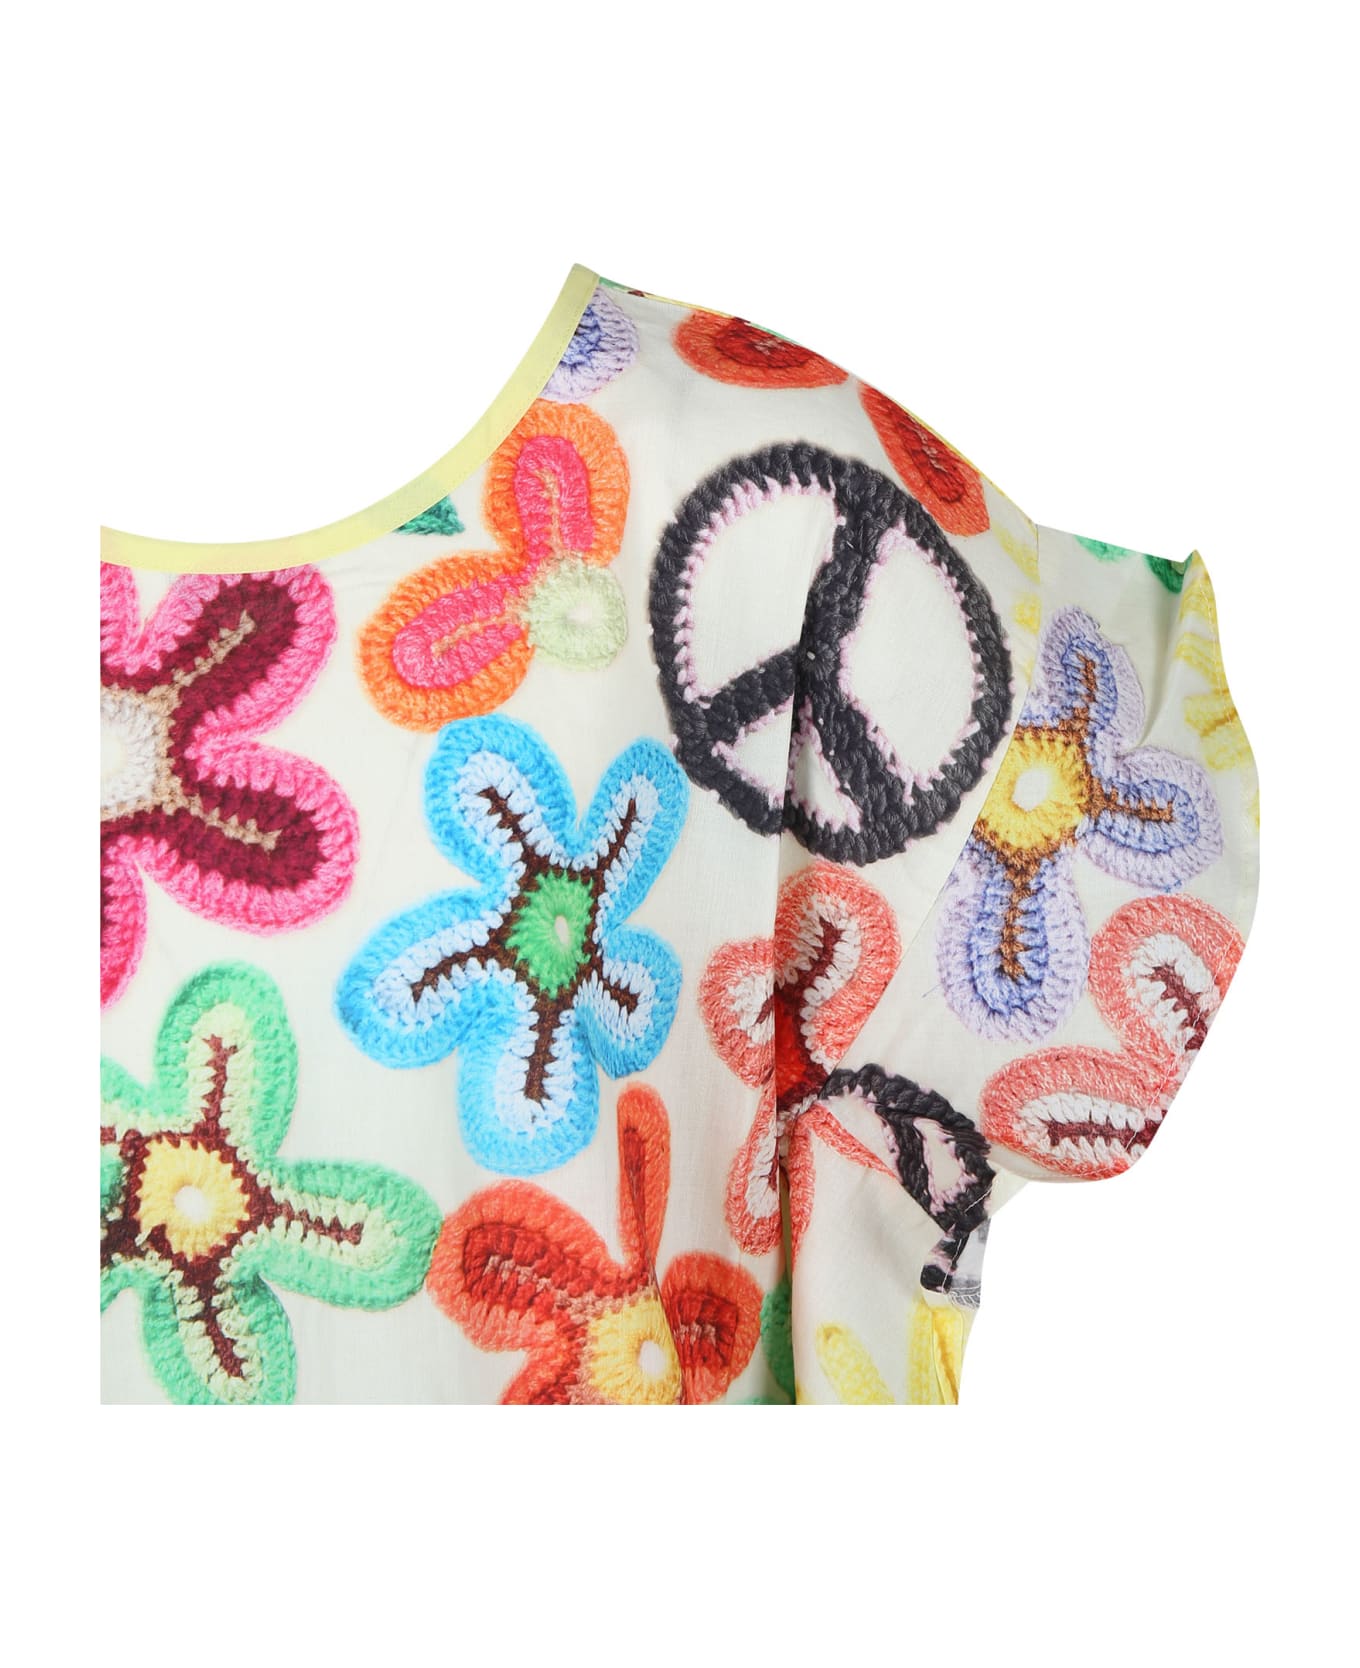 Molo Yellow Swimsuit Cover-up For Girl With Flowers Print - Multicolor